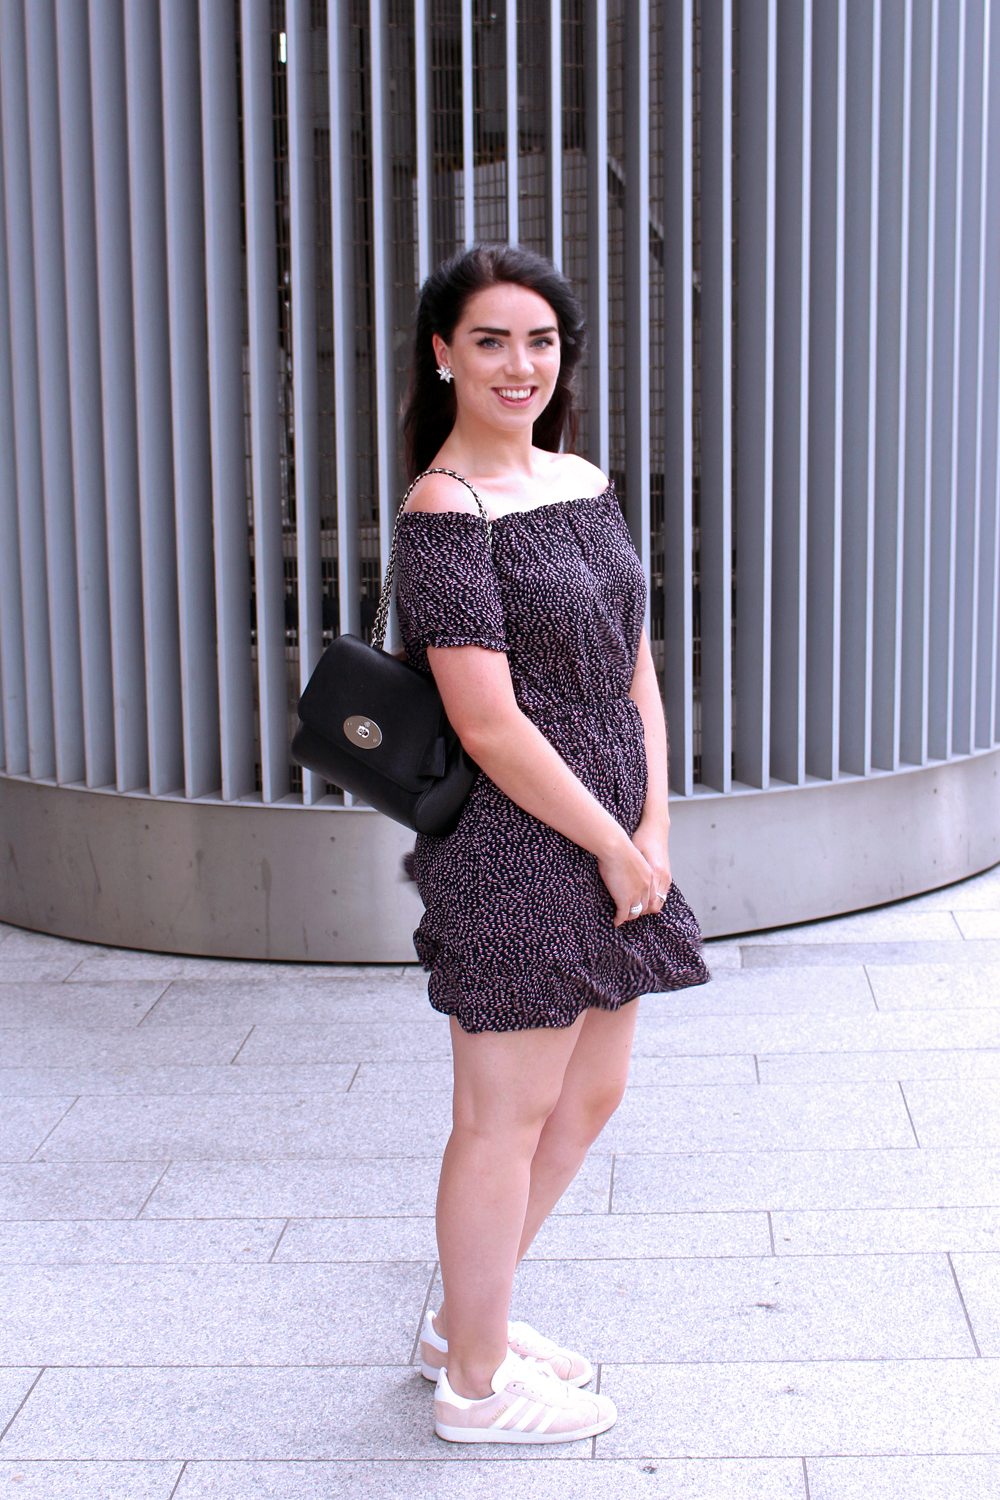 Emma Louise Layla in & other stories dress - London style blogger